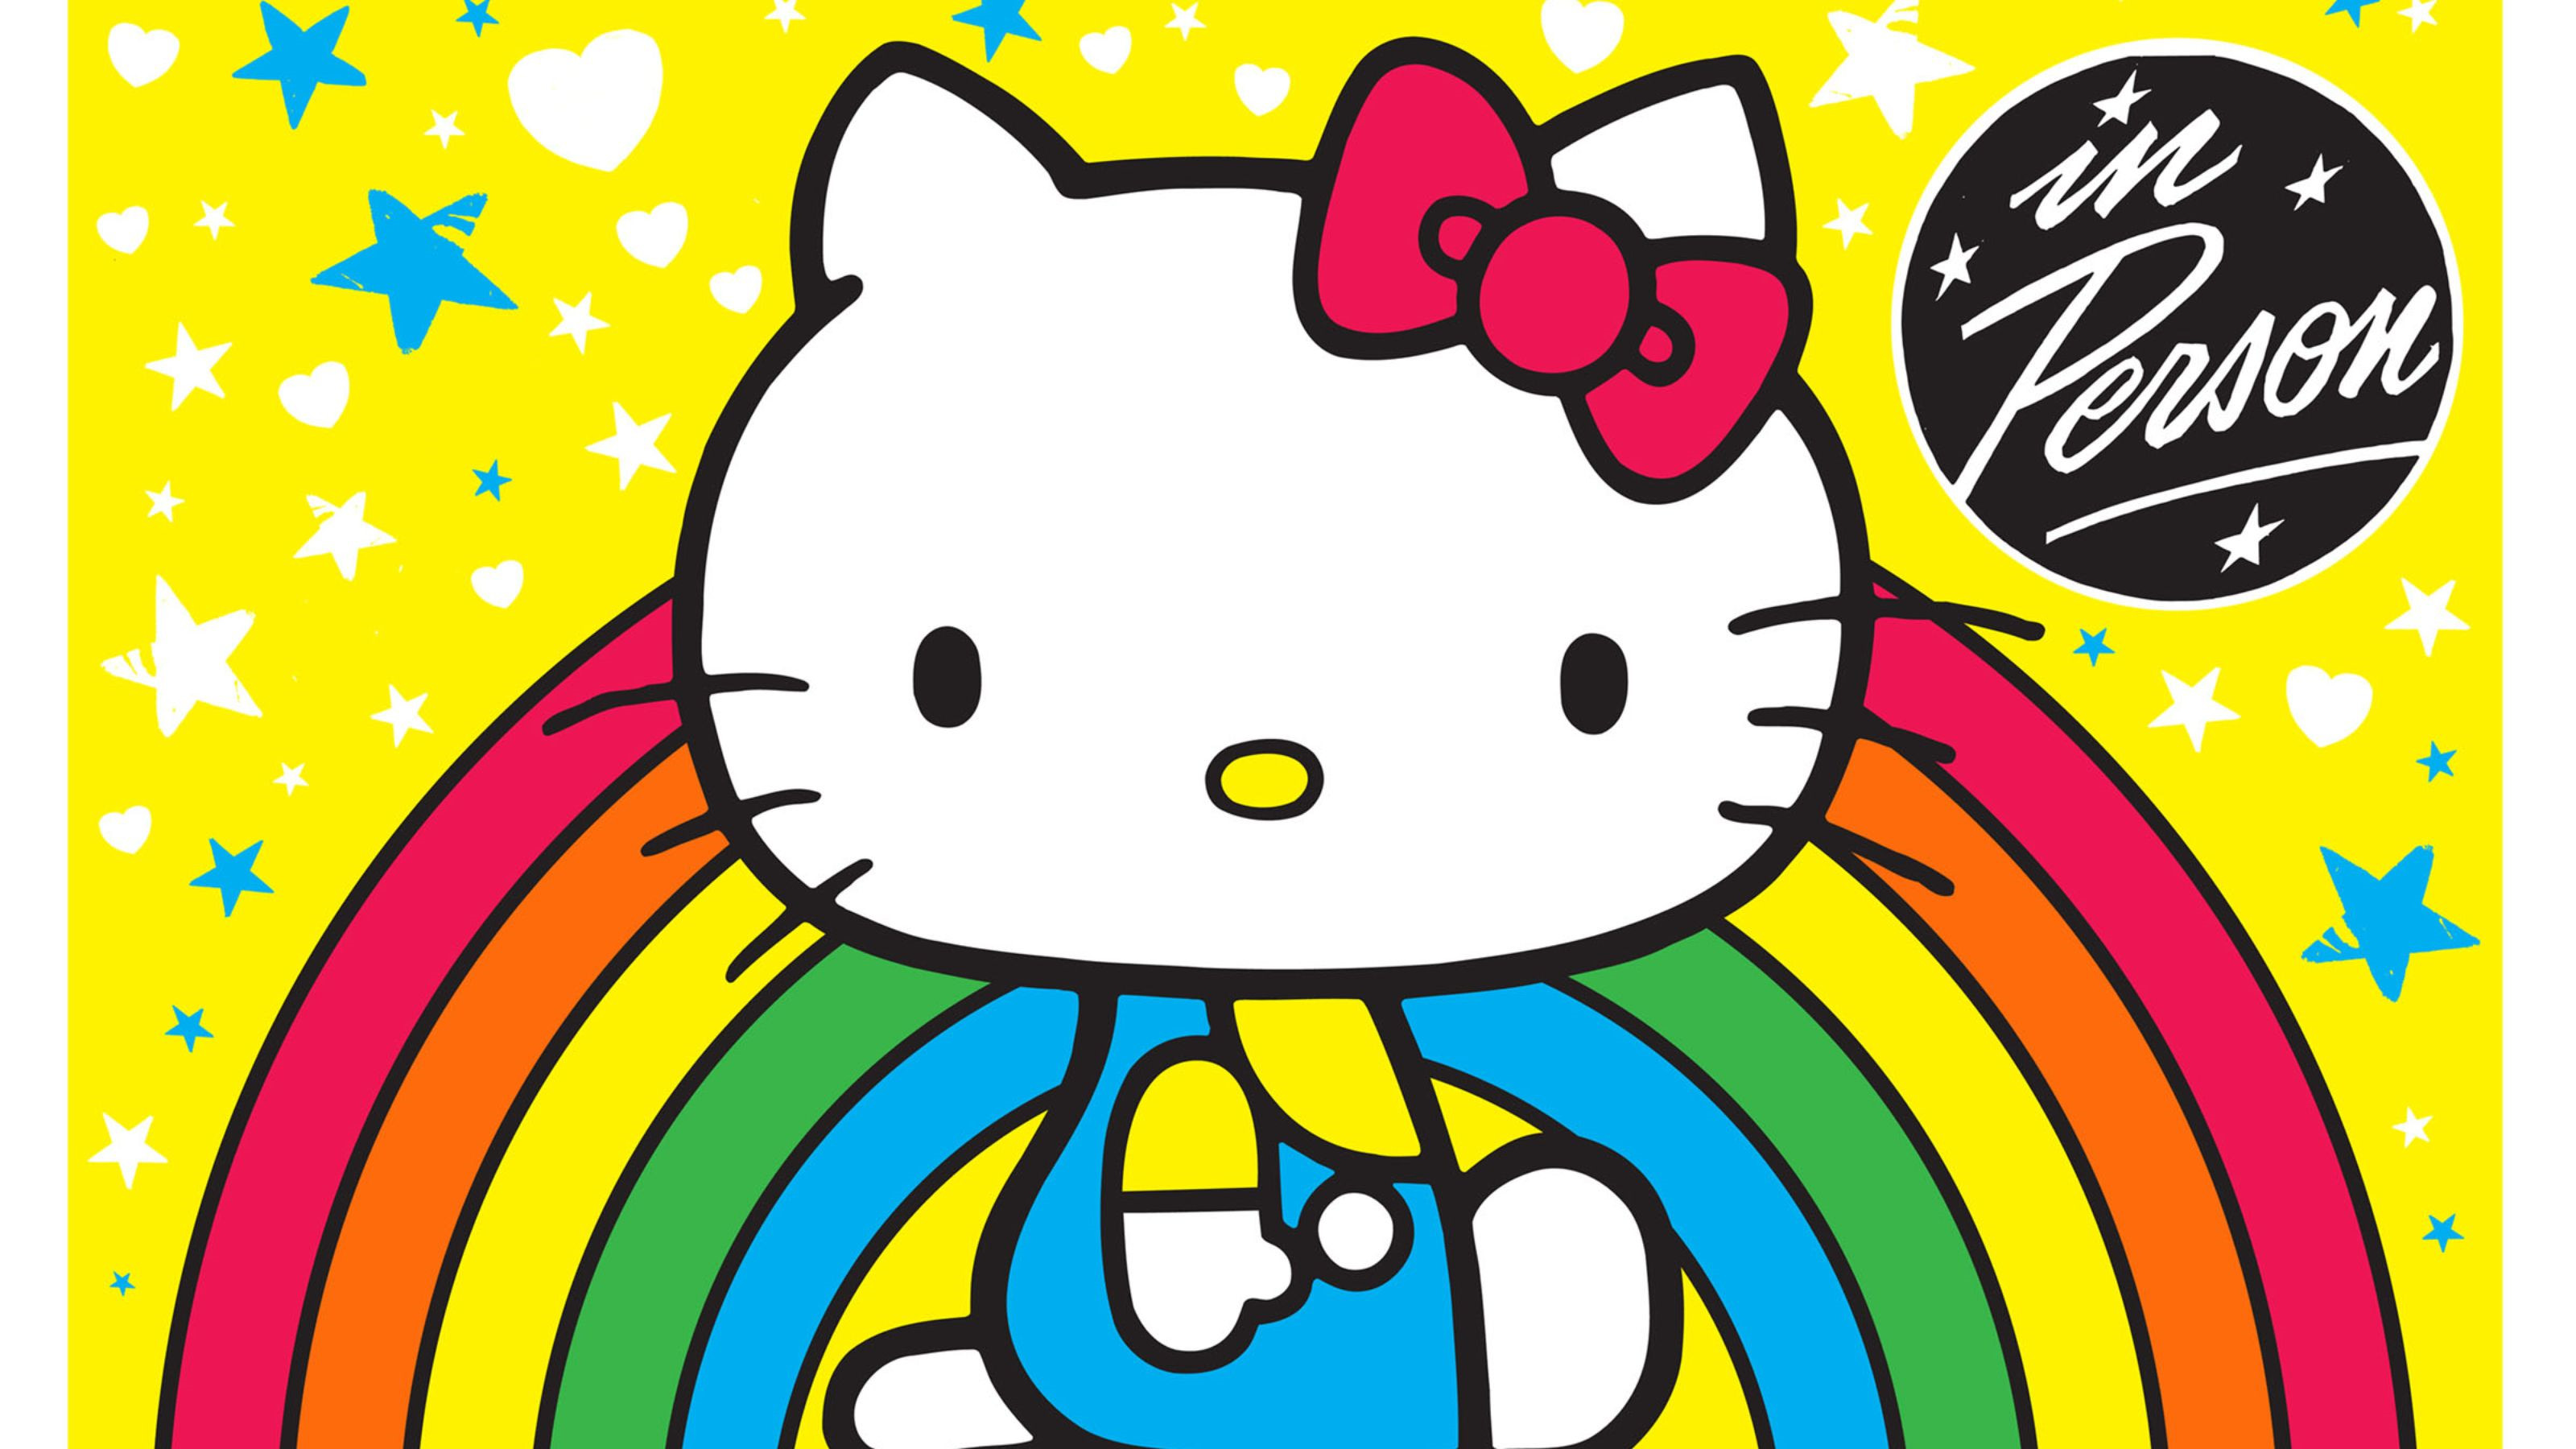 3200x1800 Free Desktop Hello Kitty Wallpapers Images Download.